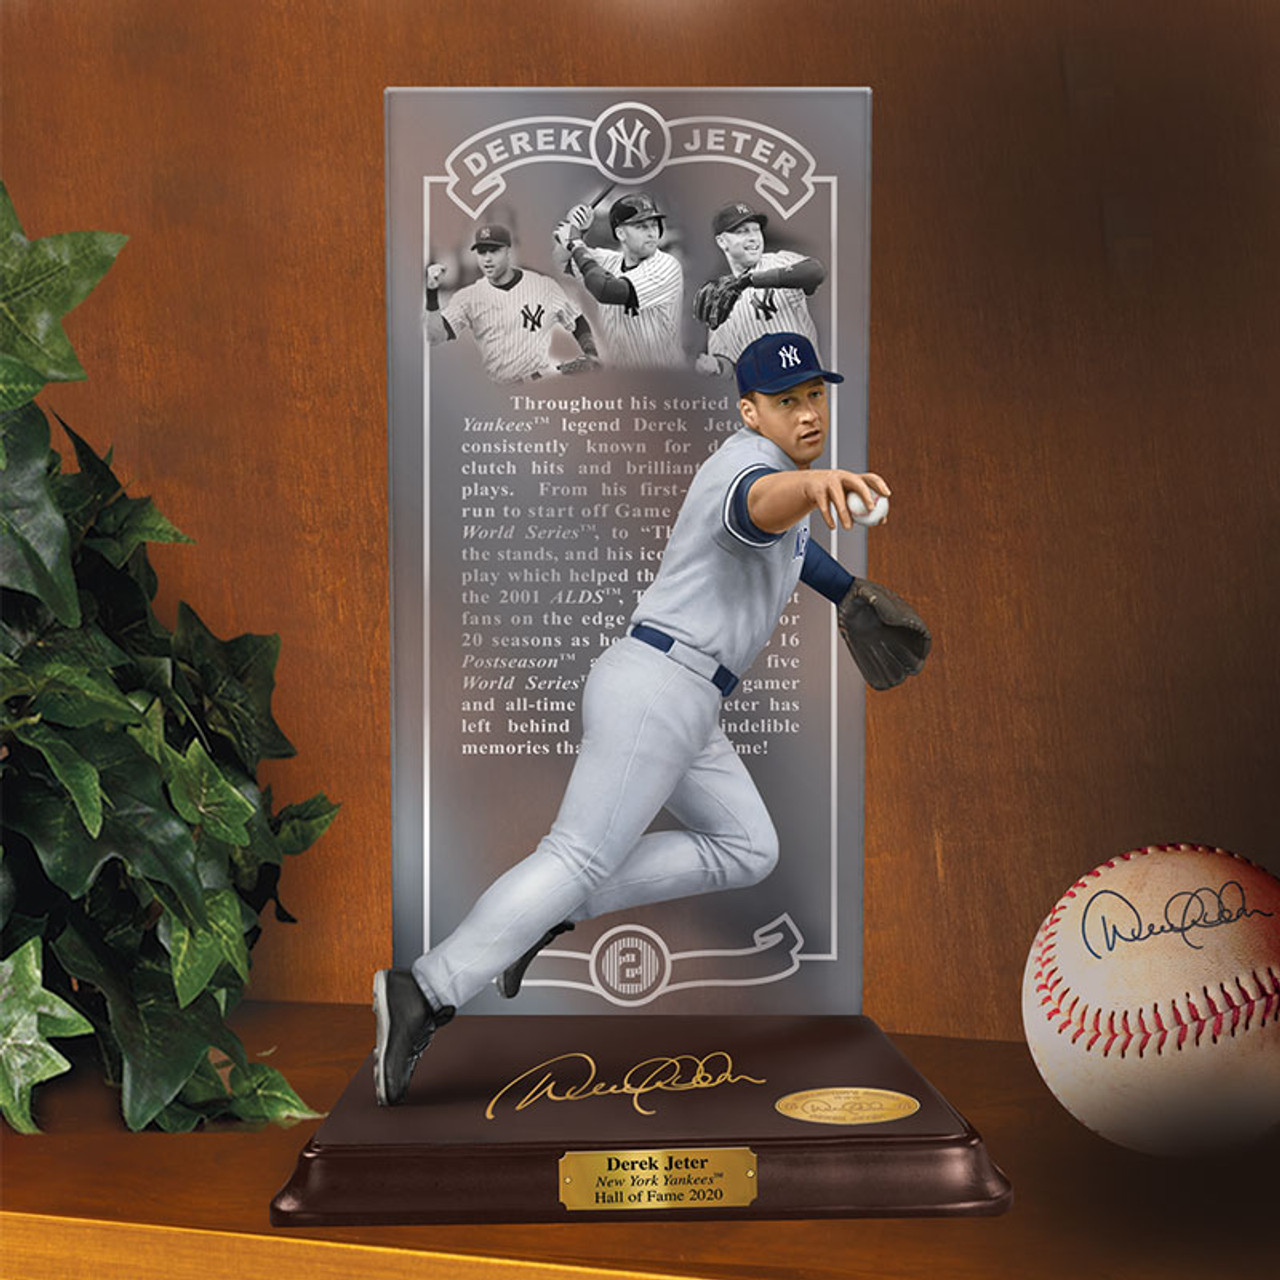 DEREK JETER HALL OF FAME LIMITED COLLECTORS EDITION SCULPTURE by Danbury  Mint